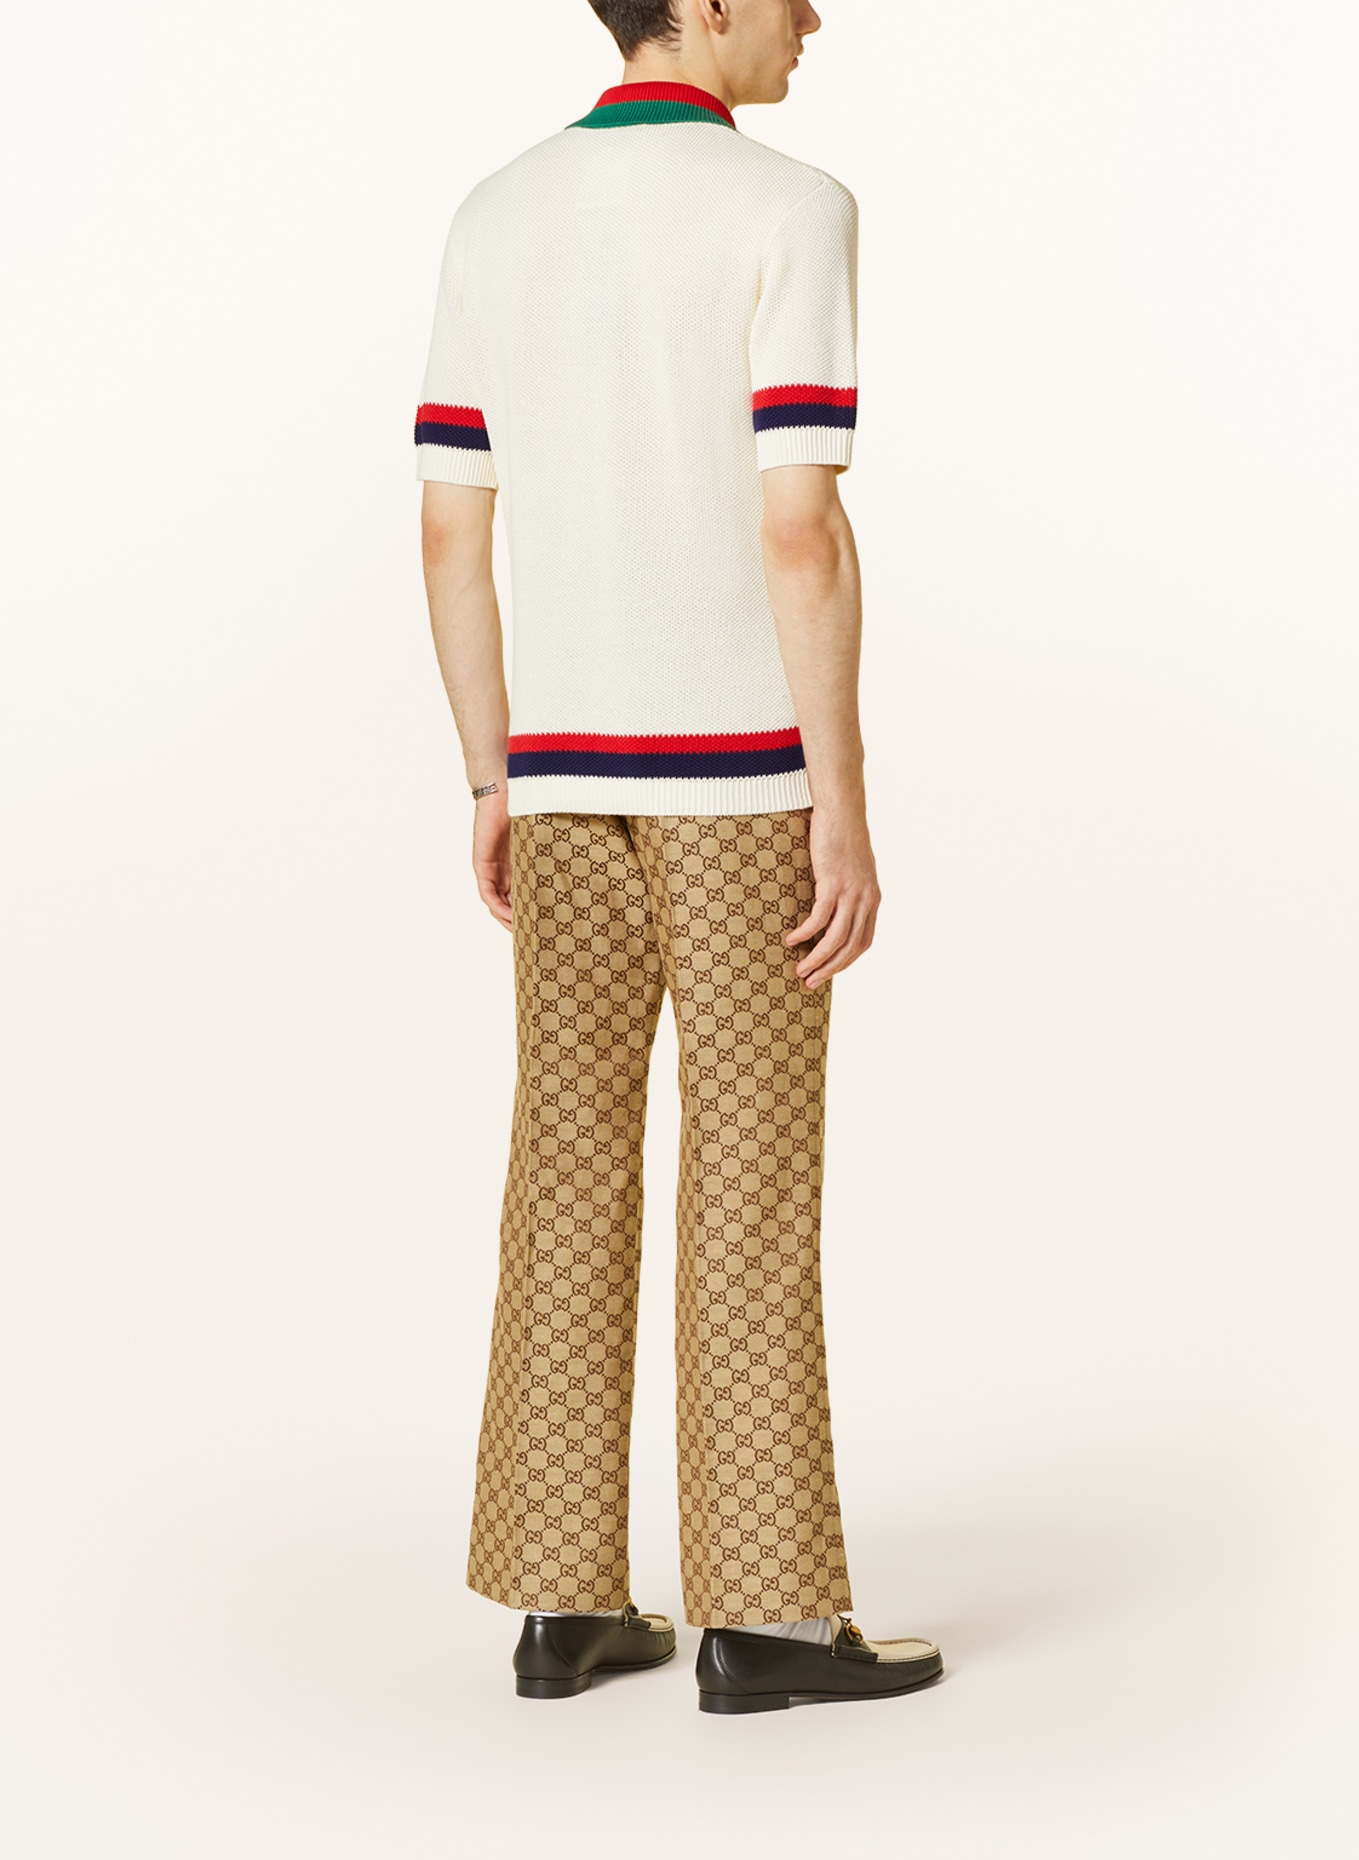 GUCCI Knitted polo shirt, Color: ECRU/ RED/ DARK BLUE (Image 3)